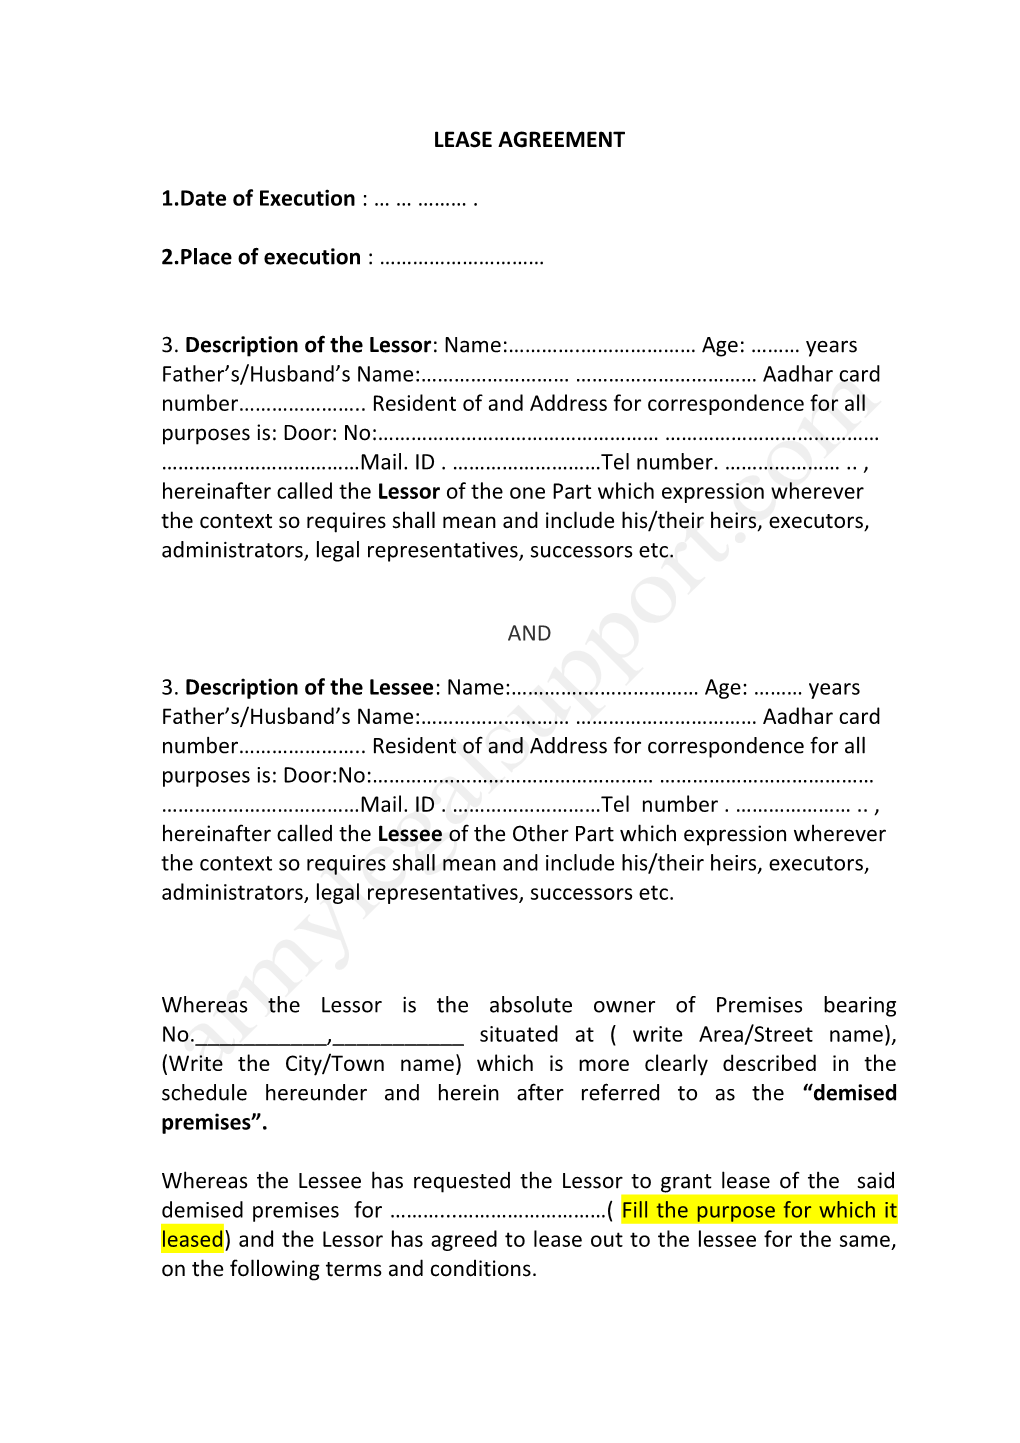 Lease Agreement s1